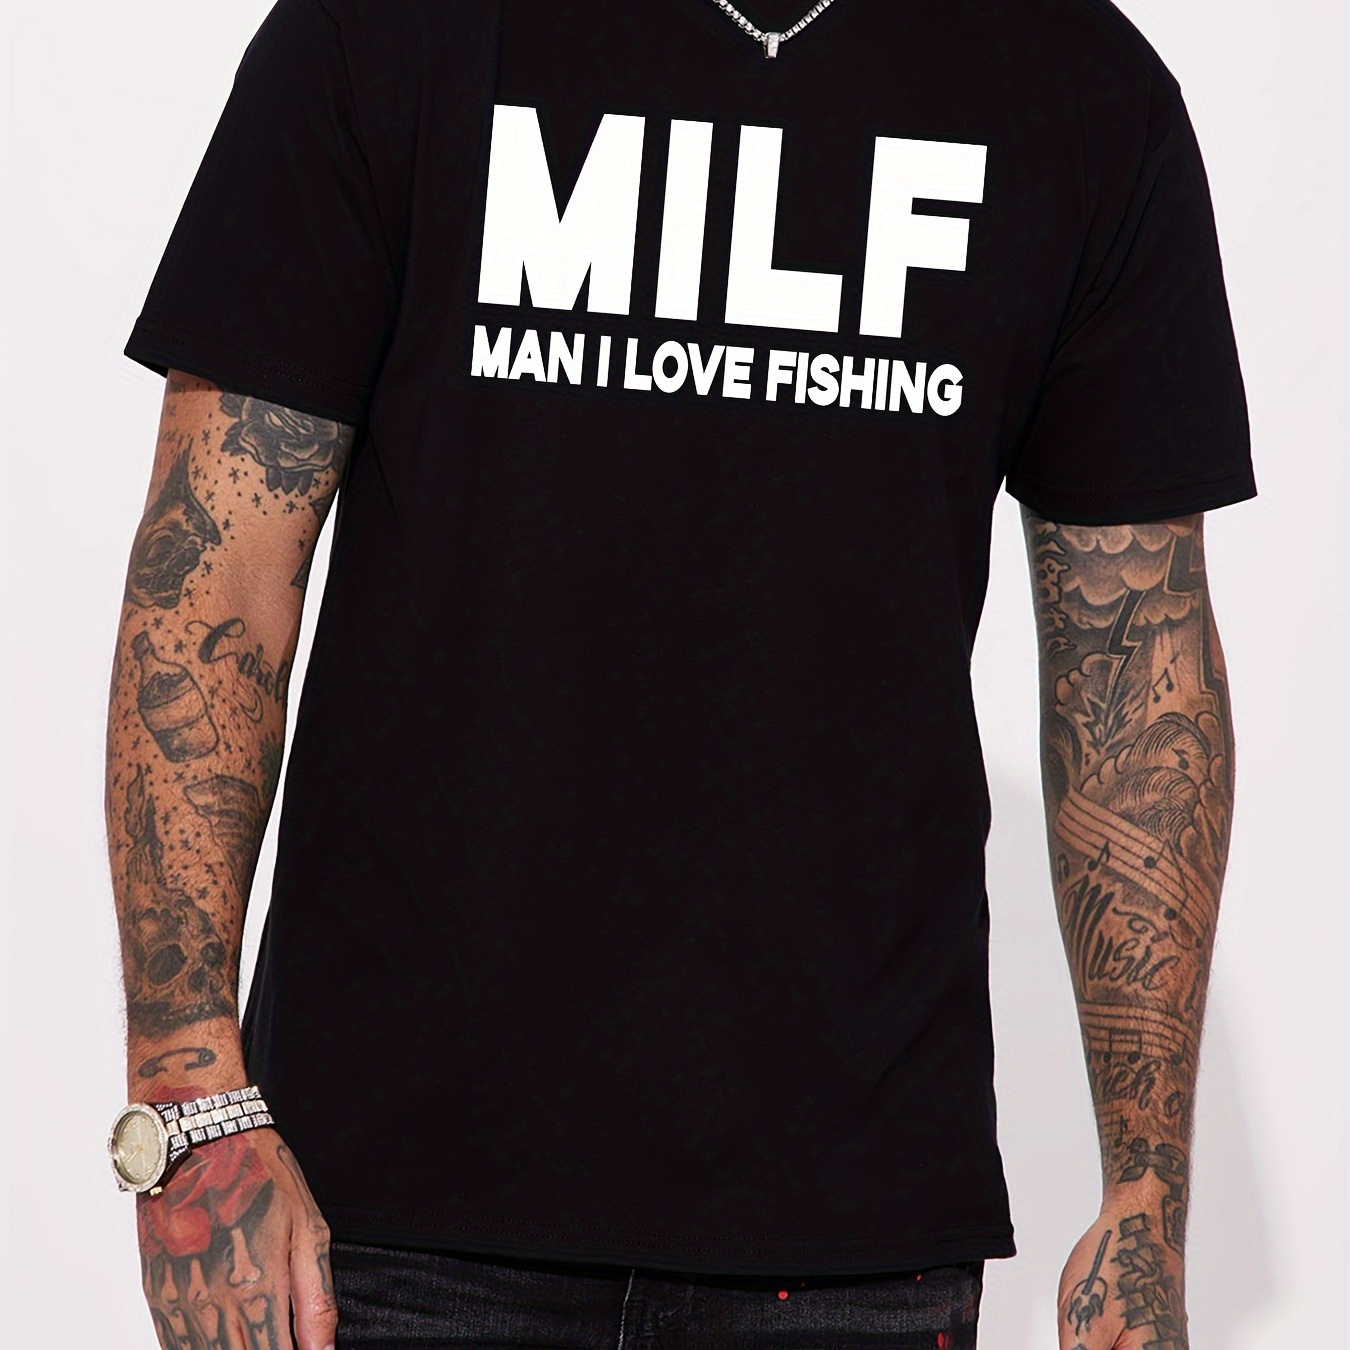 

Milf Man I Love Fishing Alphabet Print Crew Neck Short Sleeve T-shirt For Men, Casual Summer T-shirt For Daily Wear And Vacation Resorts